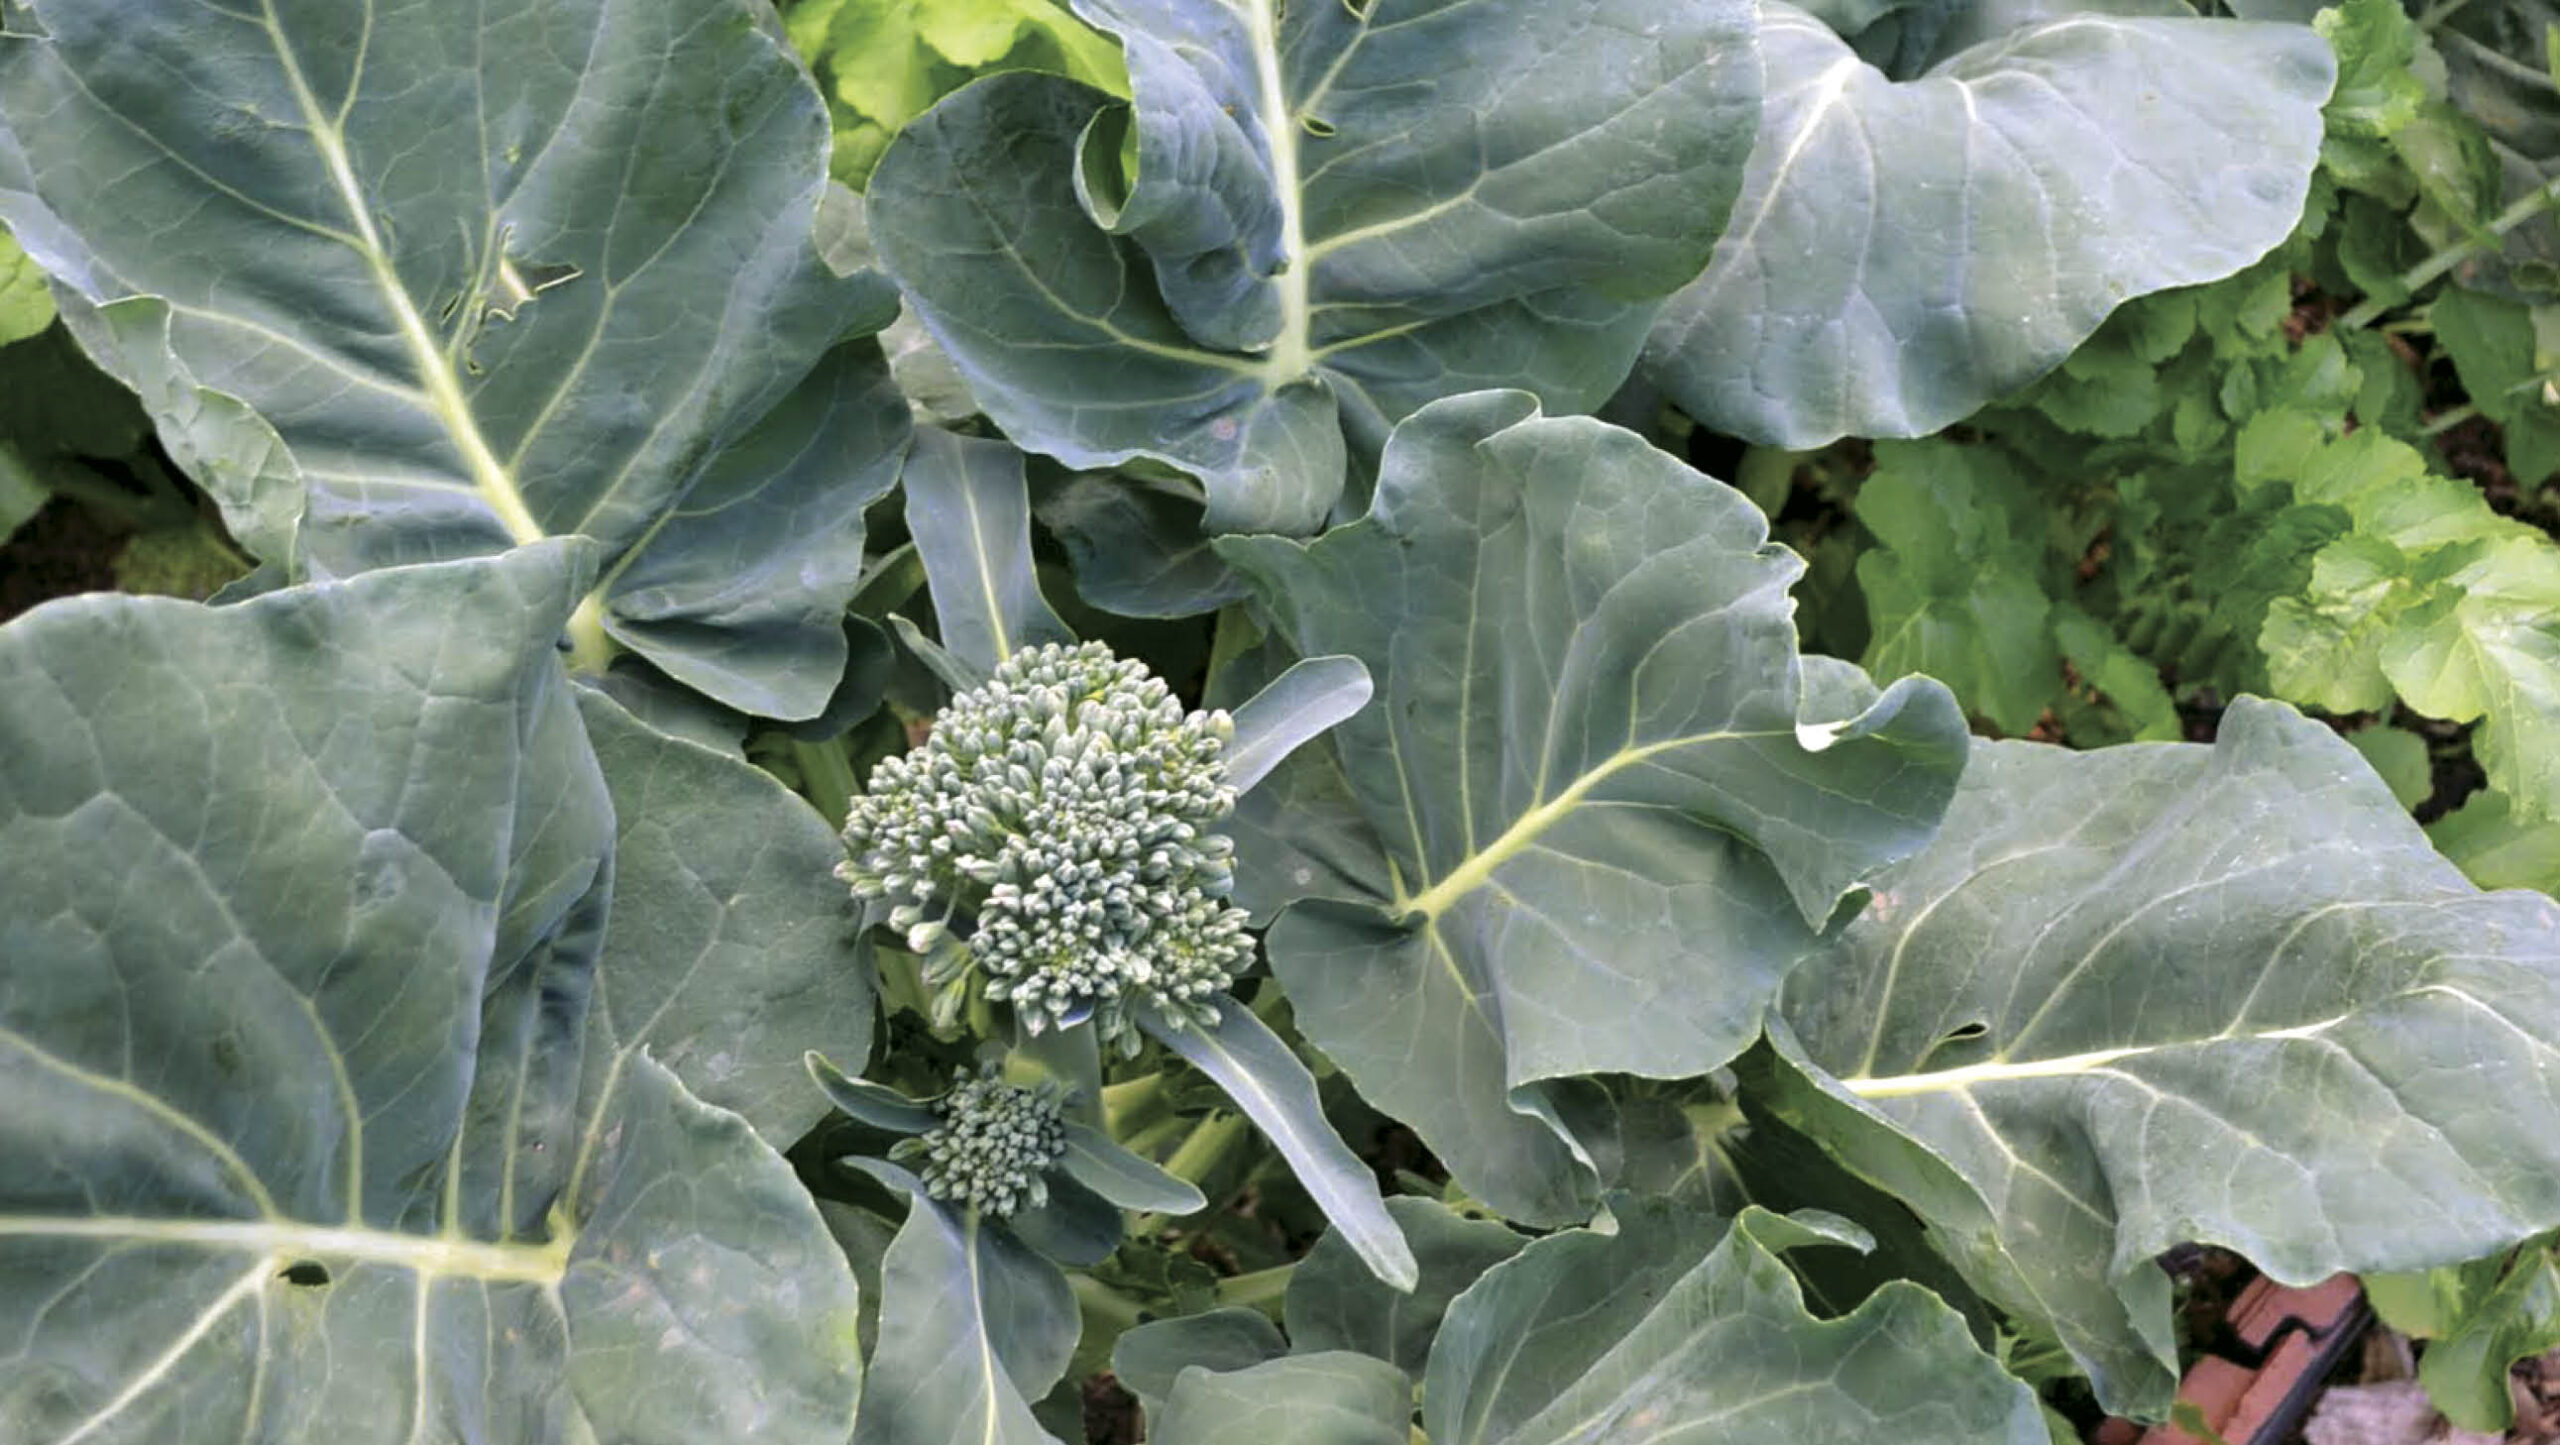 For an optimal harvest, broccoli should be planted after the extreme heat of summer.